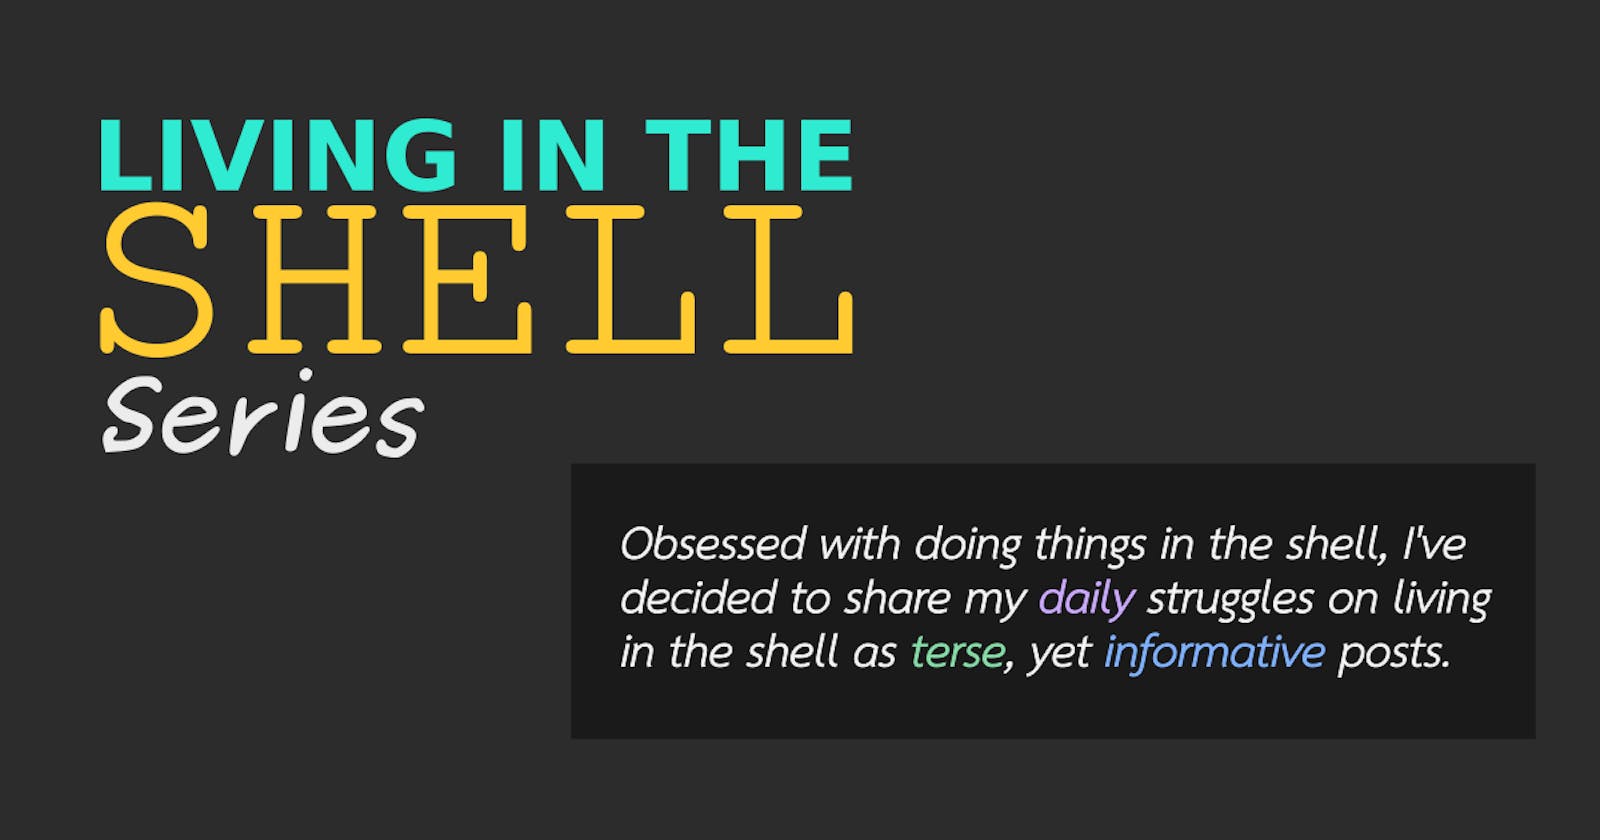 Living in the Shell #4; jq (JSON)